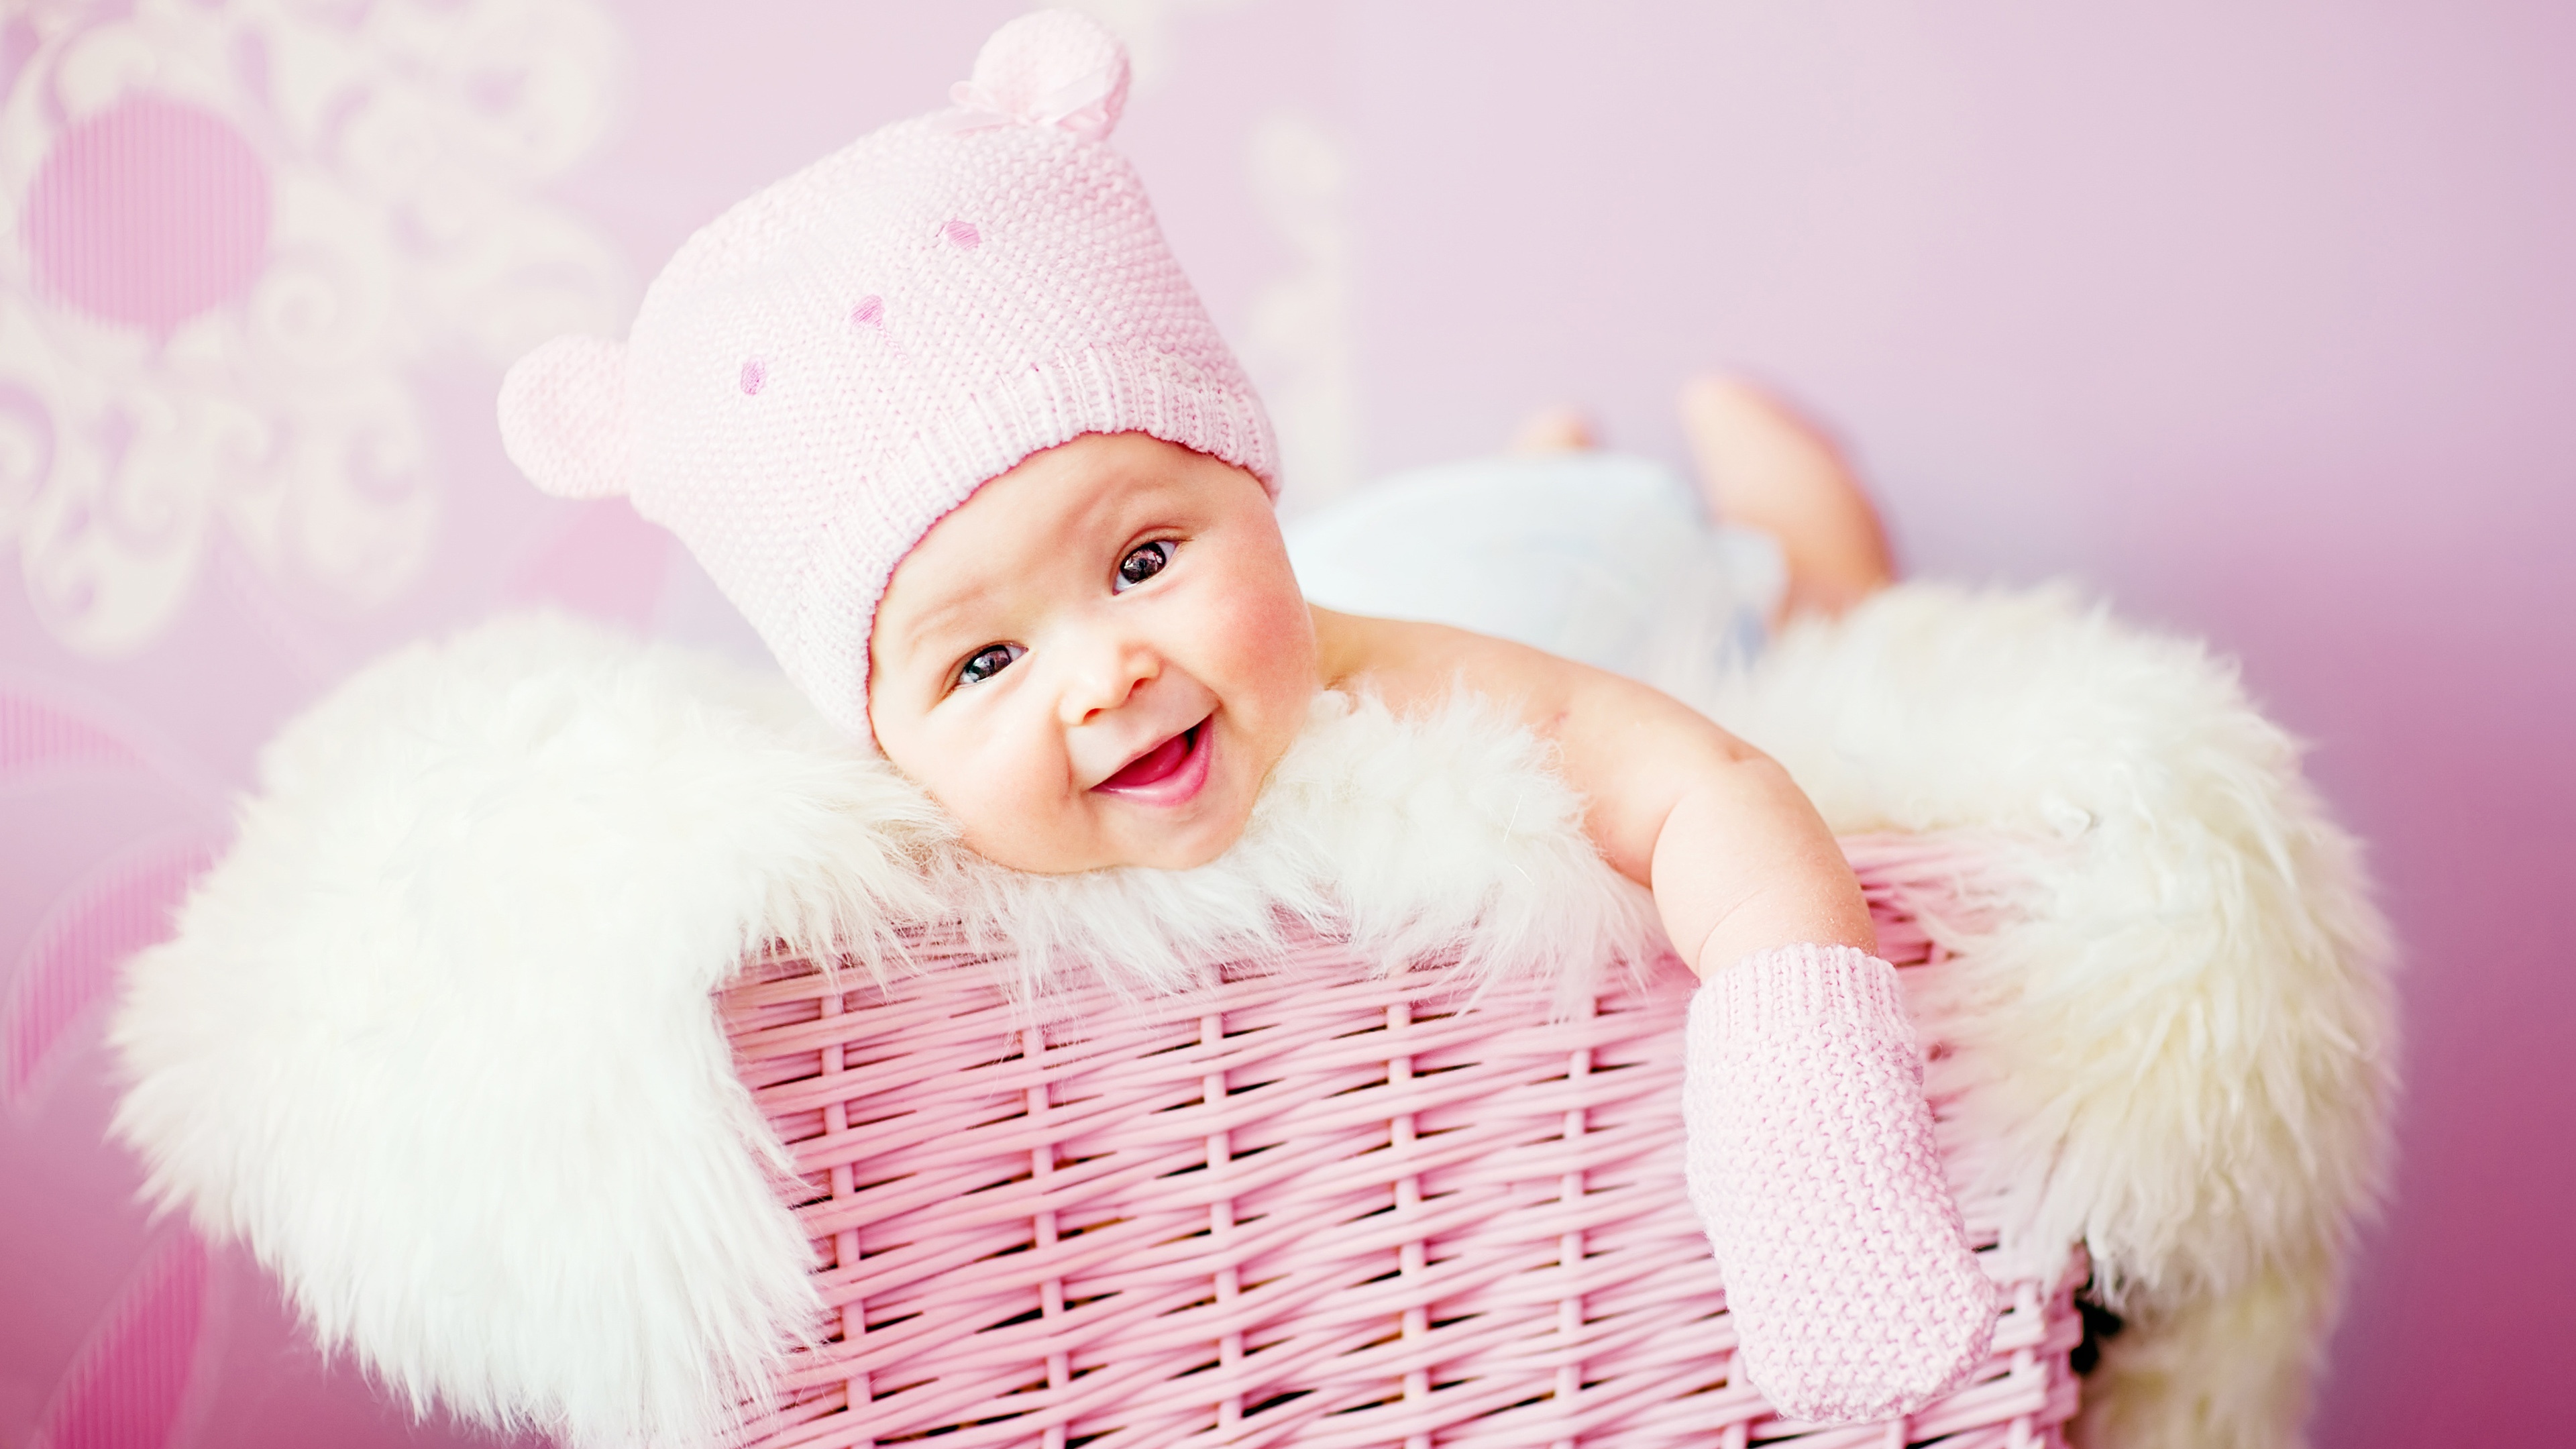 110+ 4K Baby Wallpapers | Background Images